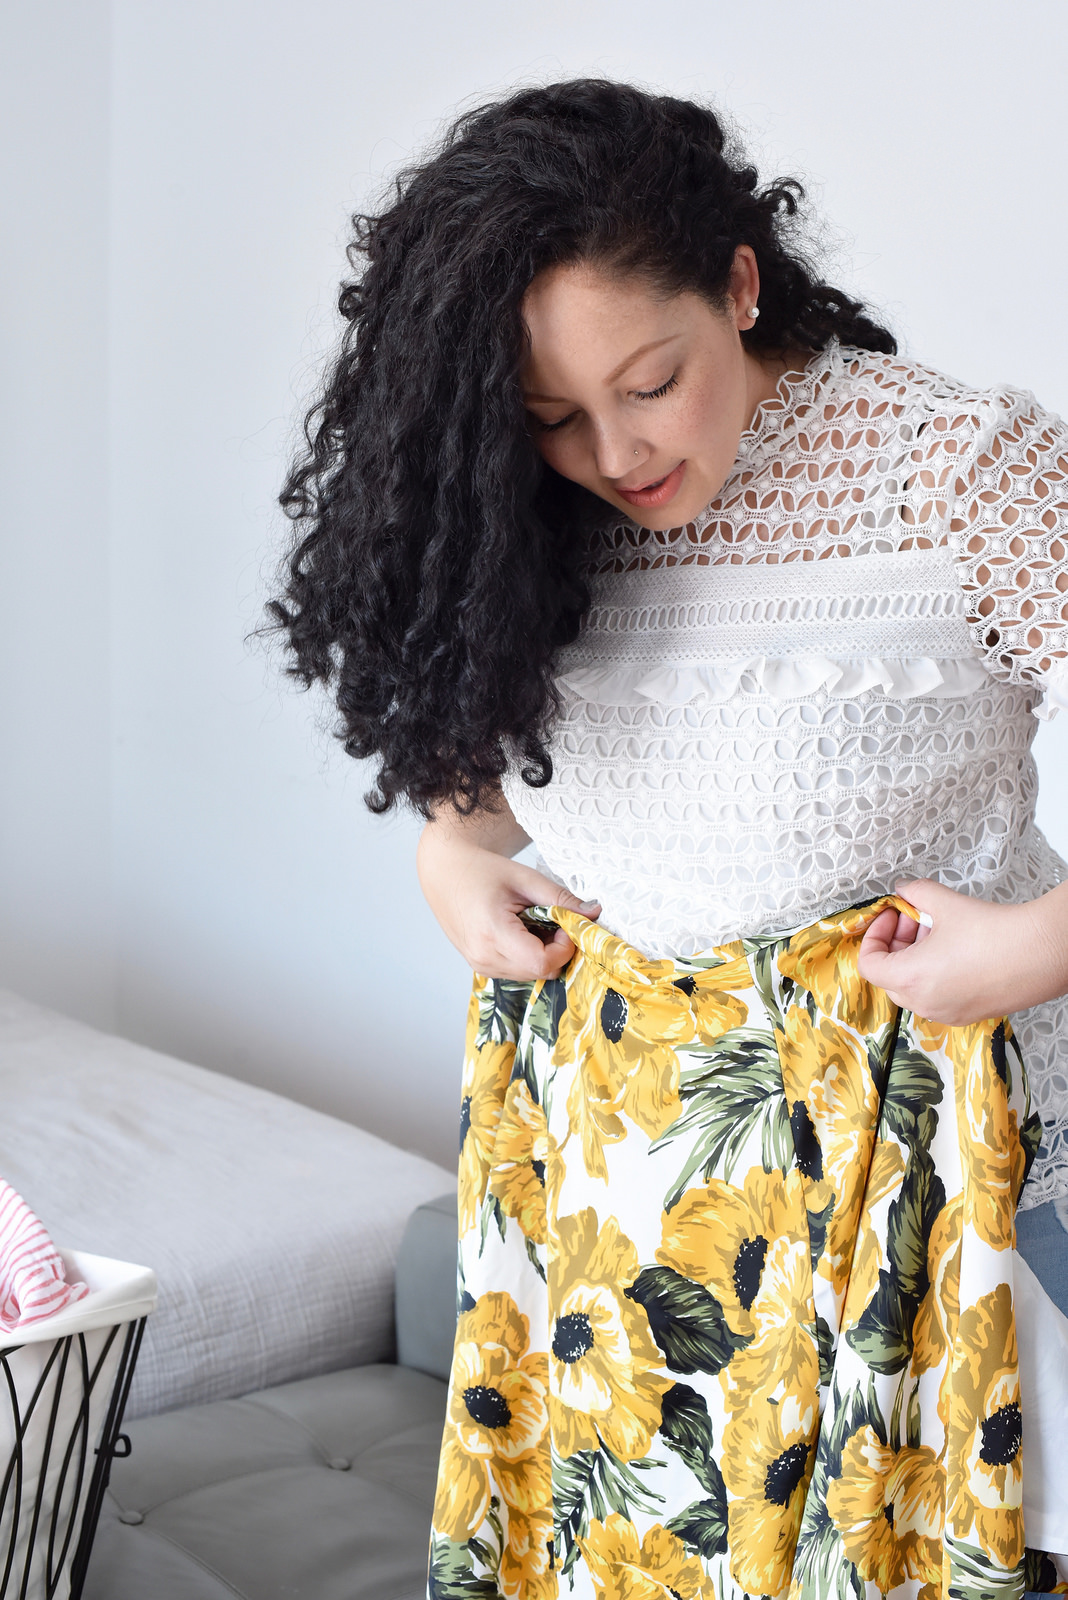 How to Keep Your Clothes Like New via @GirlWithCurves